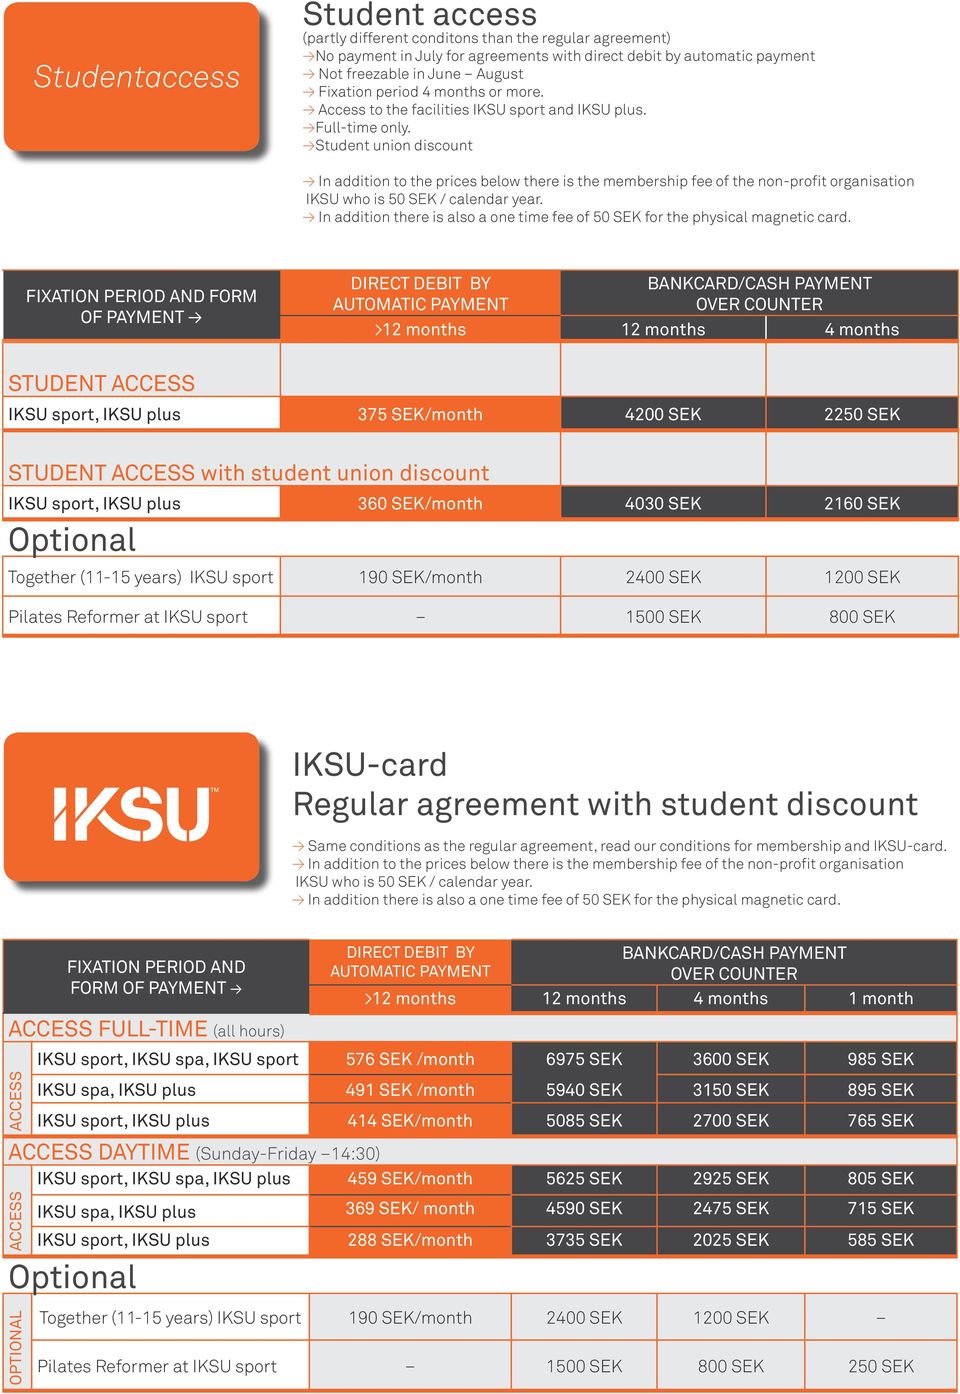 Student union discount In addition to the prices below there is the membership fee of the non-profit organisation IKSU who is 50 SEK / calendar year.